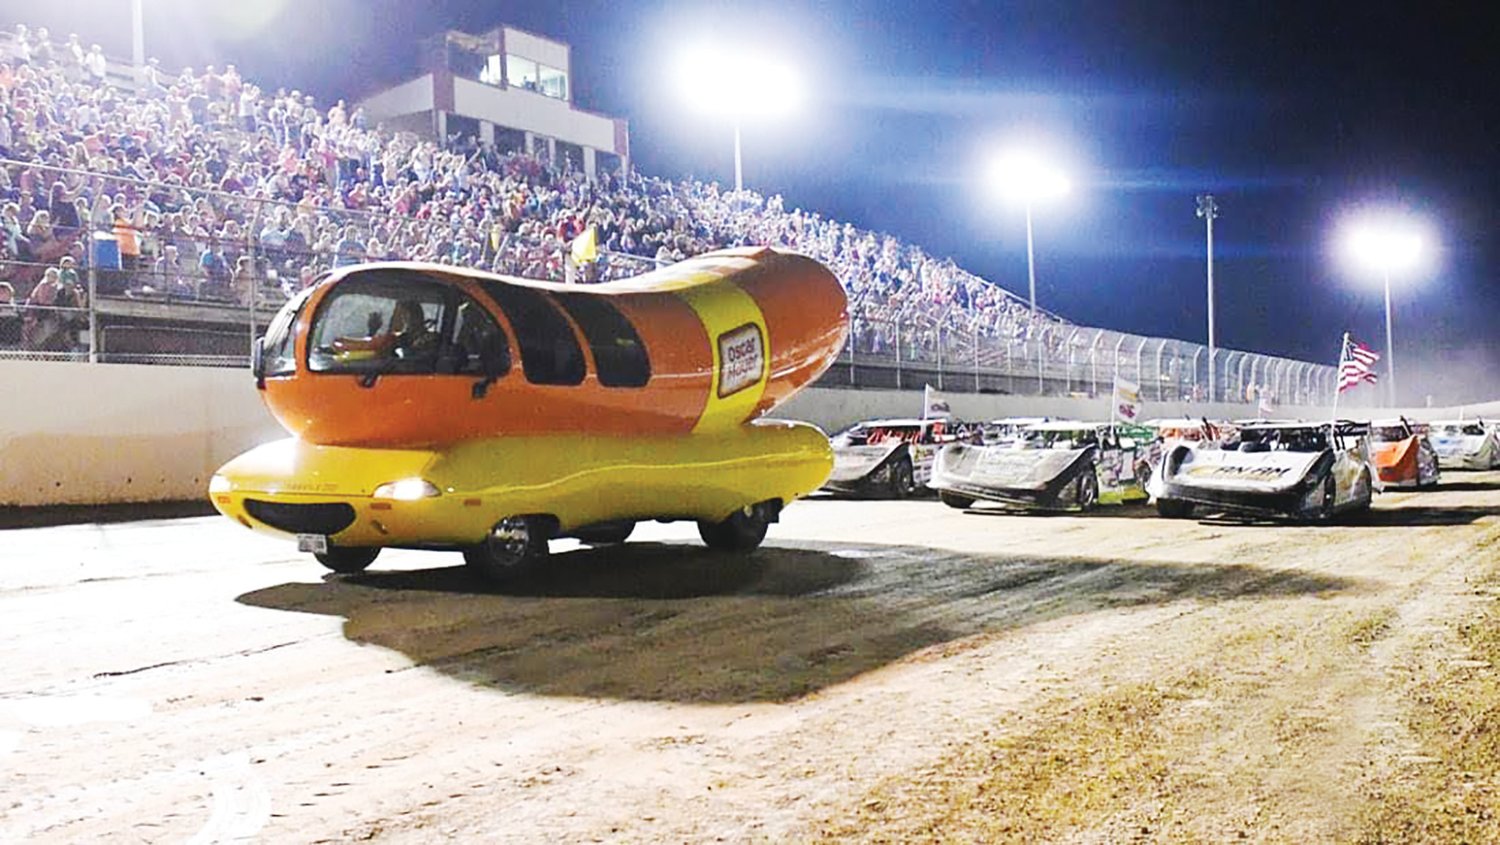 Randolph County Raceway will be the site of the Second Annual Wiener Nationals beginning at 5:30 p.m. on Sunday, July 17. There will be two divisions of racing: MLRA and B-Modified. Murphy’s Ford will provide musical entertainment and there will be plenty of interactivity with fans.